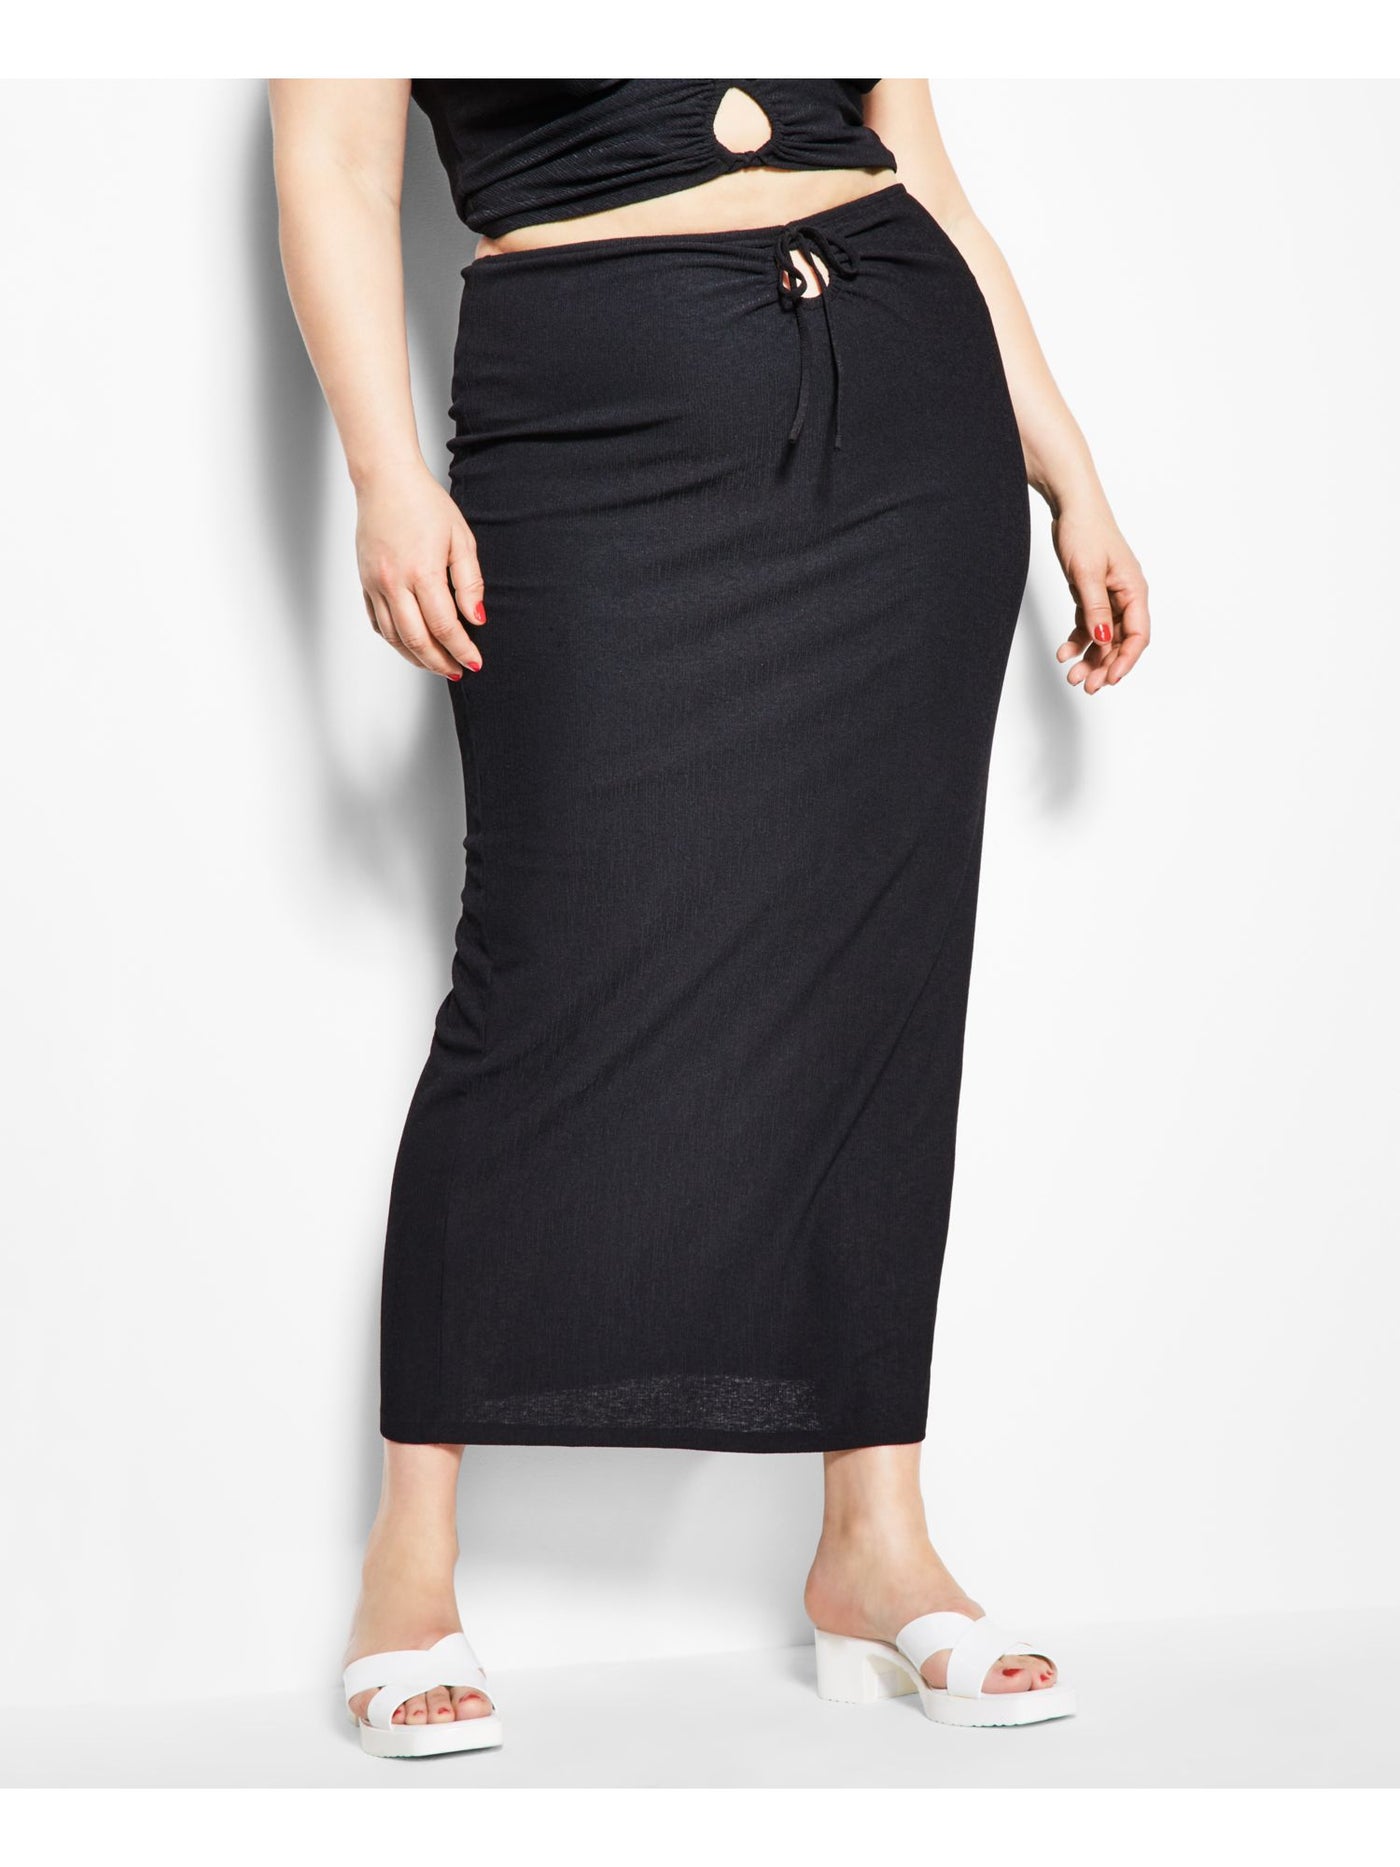 ROYALTY BY MALUMA Womens Black Ribbed Cut Out Pull-on Tie Detail Maxi Pencil Skirt XXL